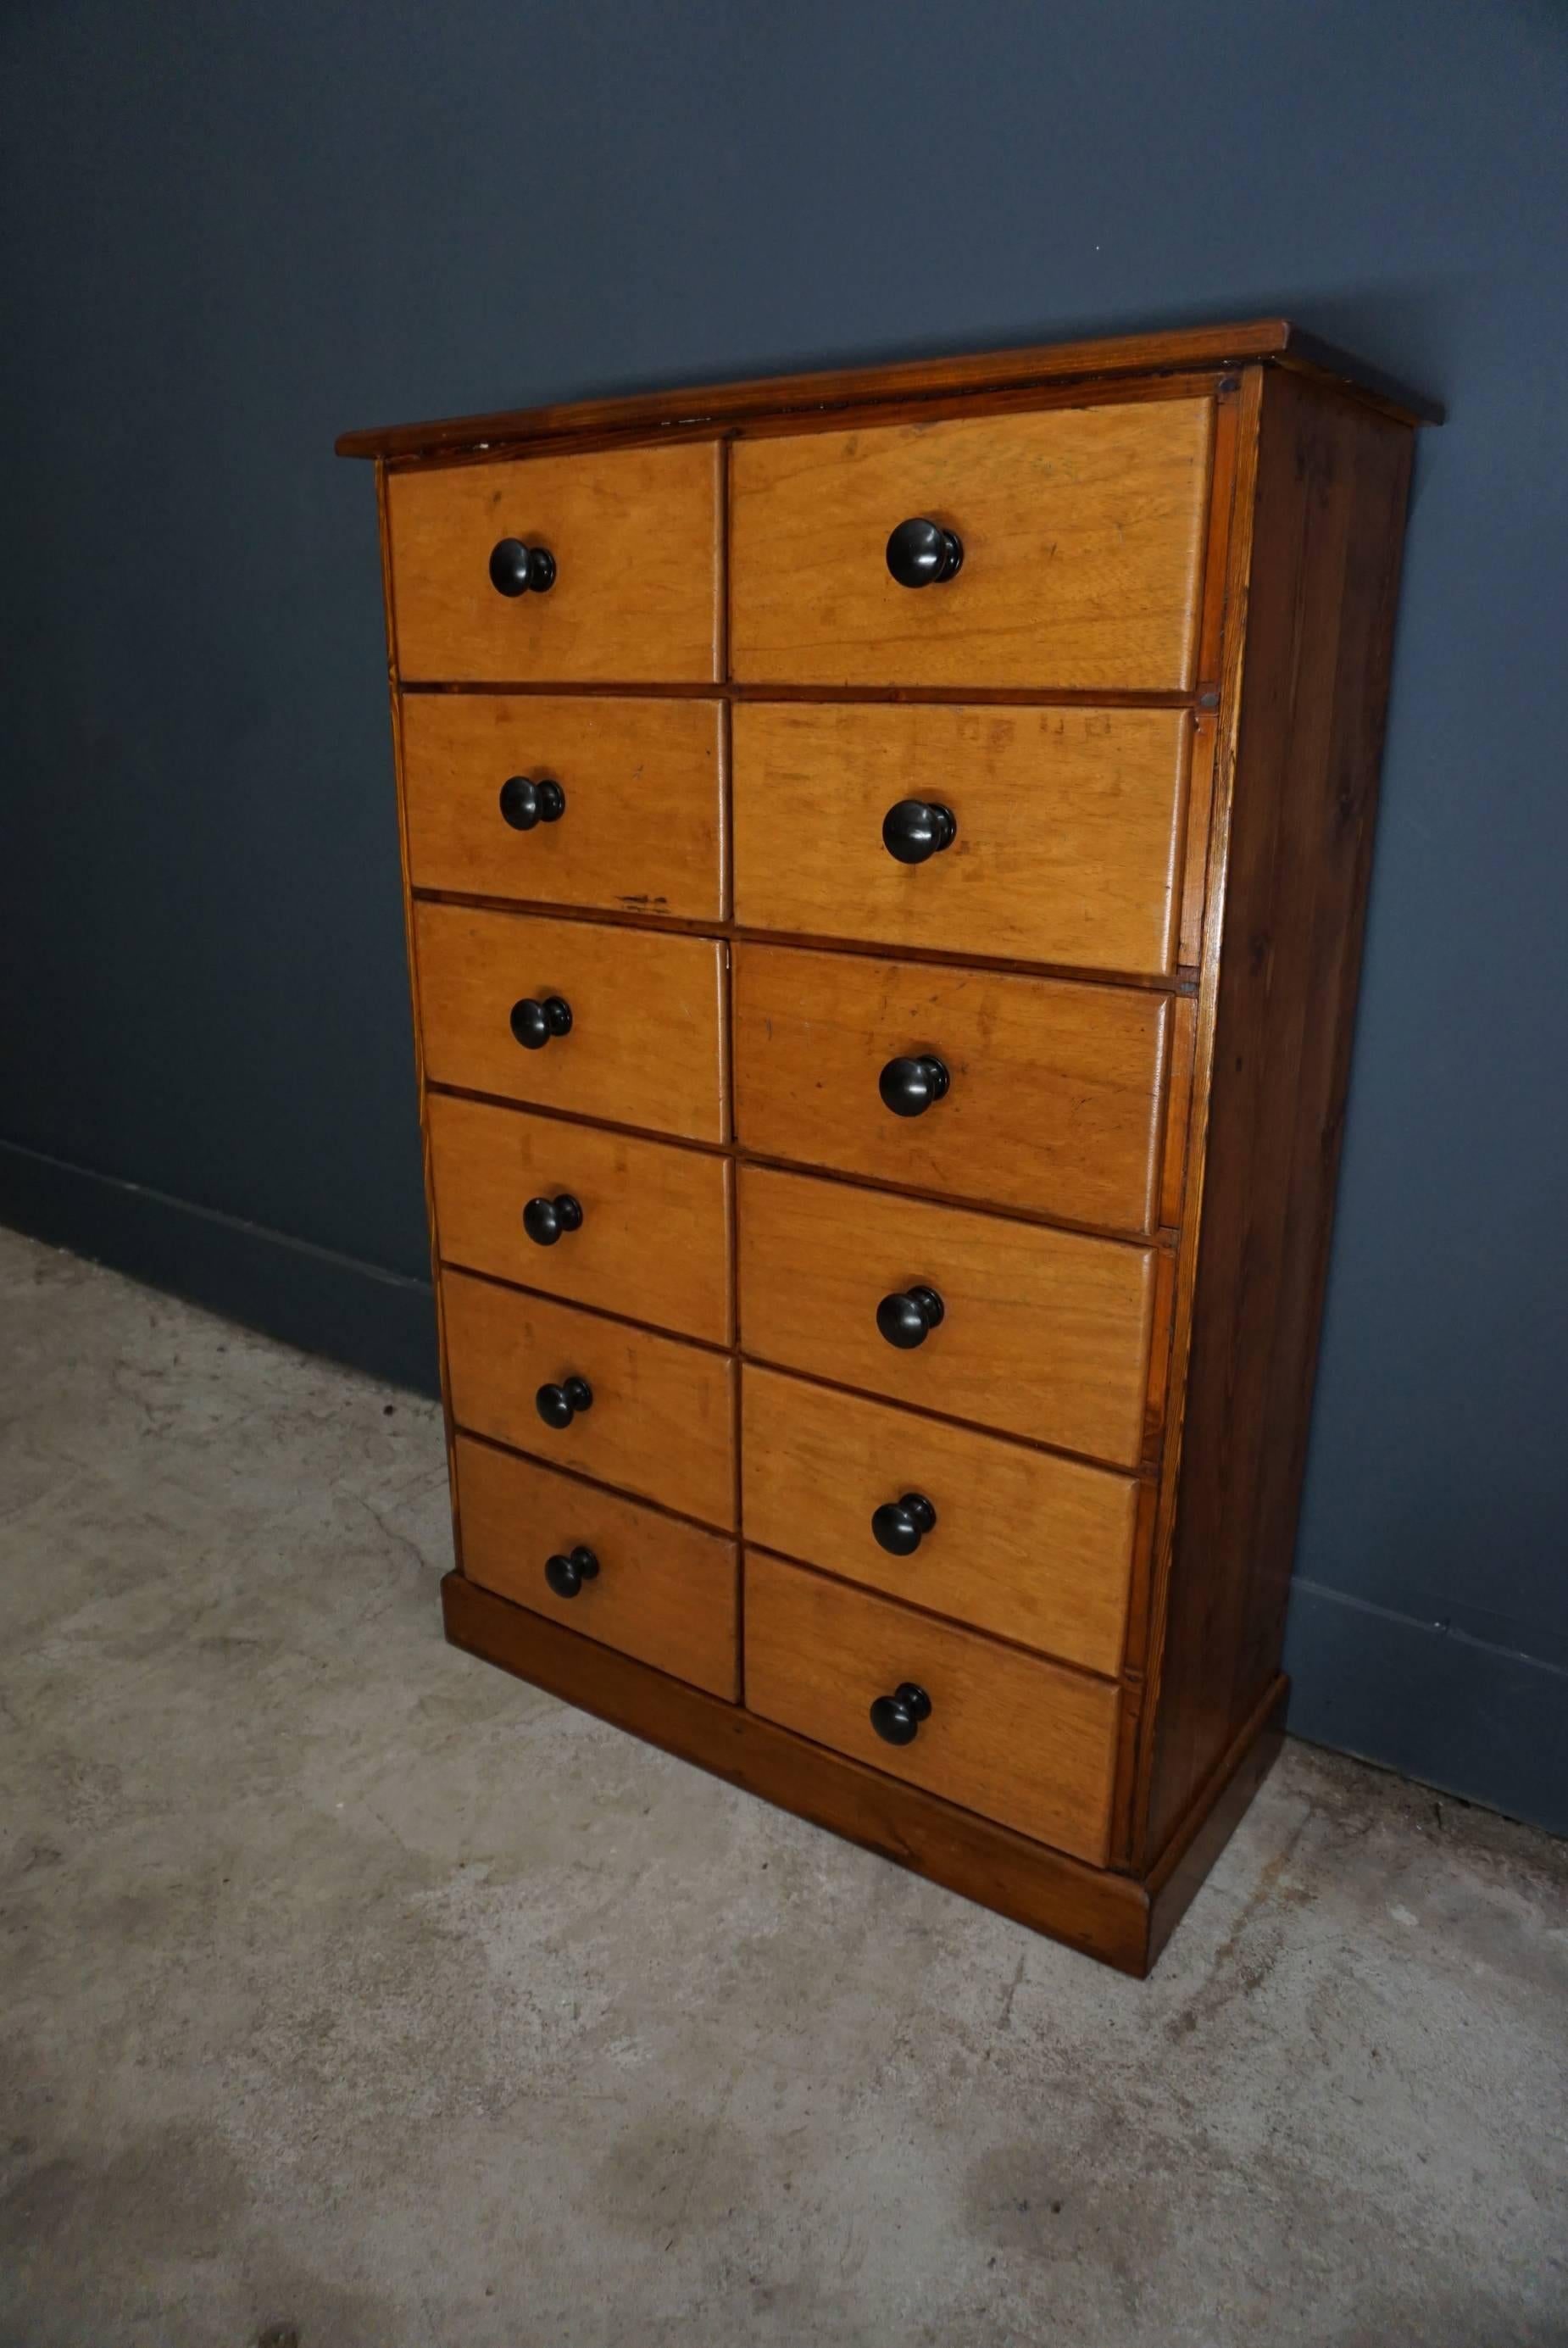 This oak apothecary cabinet was designed and made circa 1950 in France. It features 12 drawers with bakelite hardware. The inside of the drawers measure: 25.8 x 28.5 x 12.7 cm.